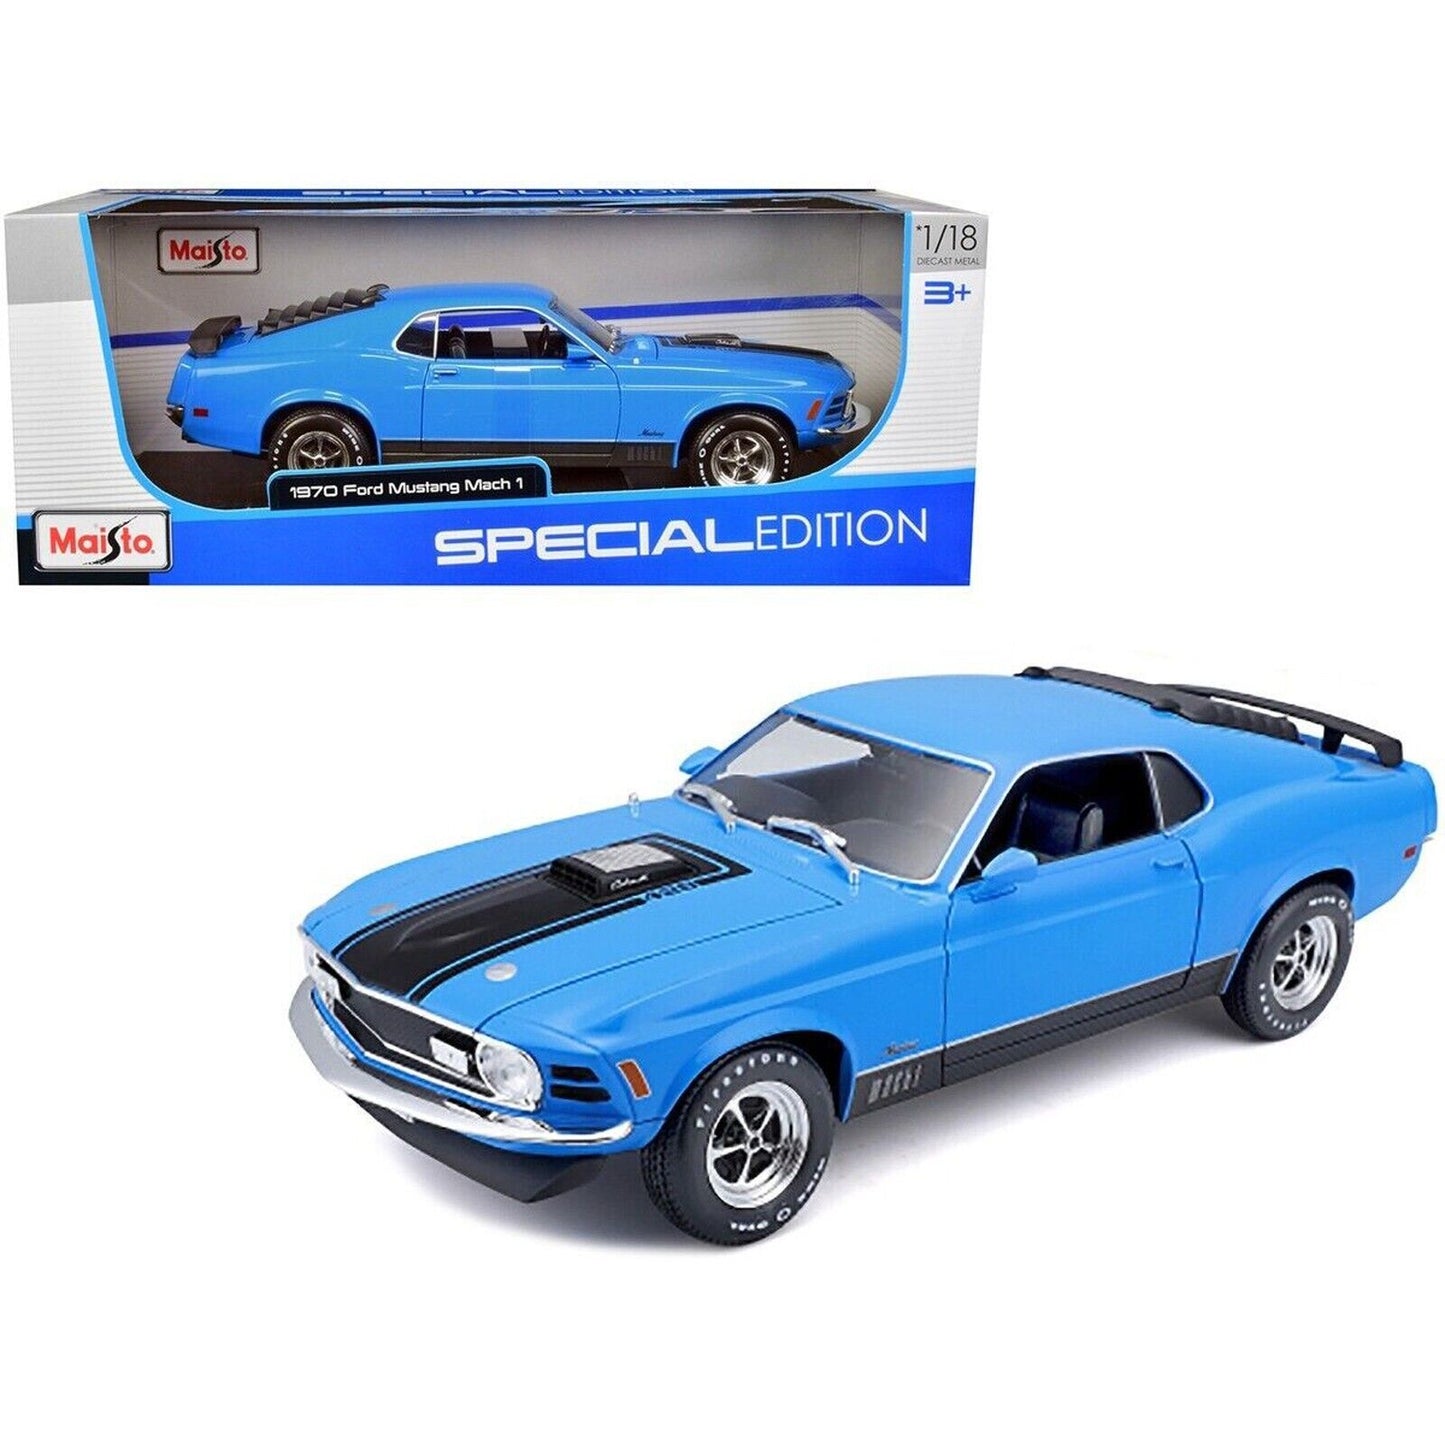 1970 Ford Mustang Mach 1 Blue 1/18 Diecast car by Maisto